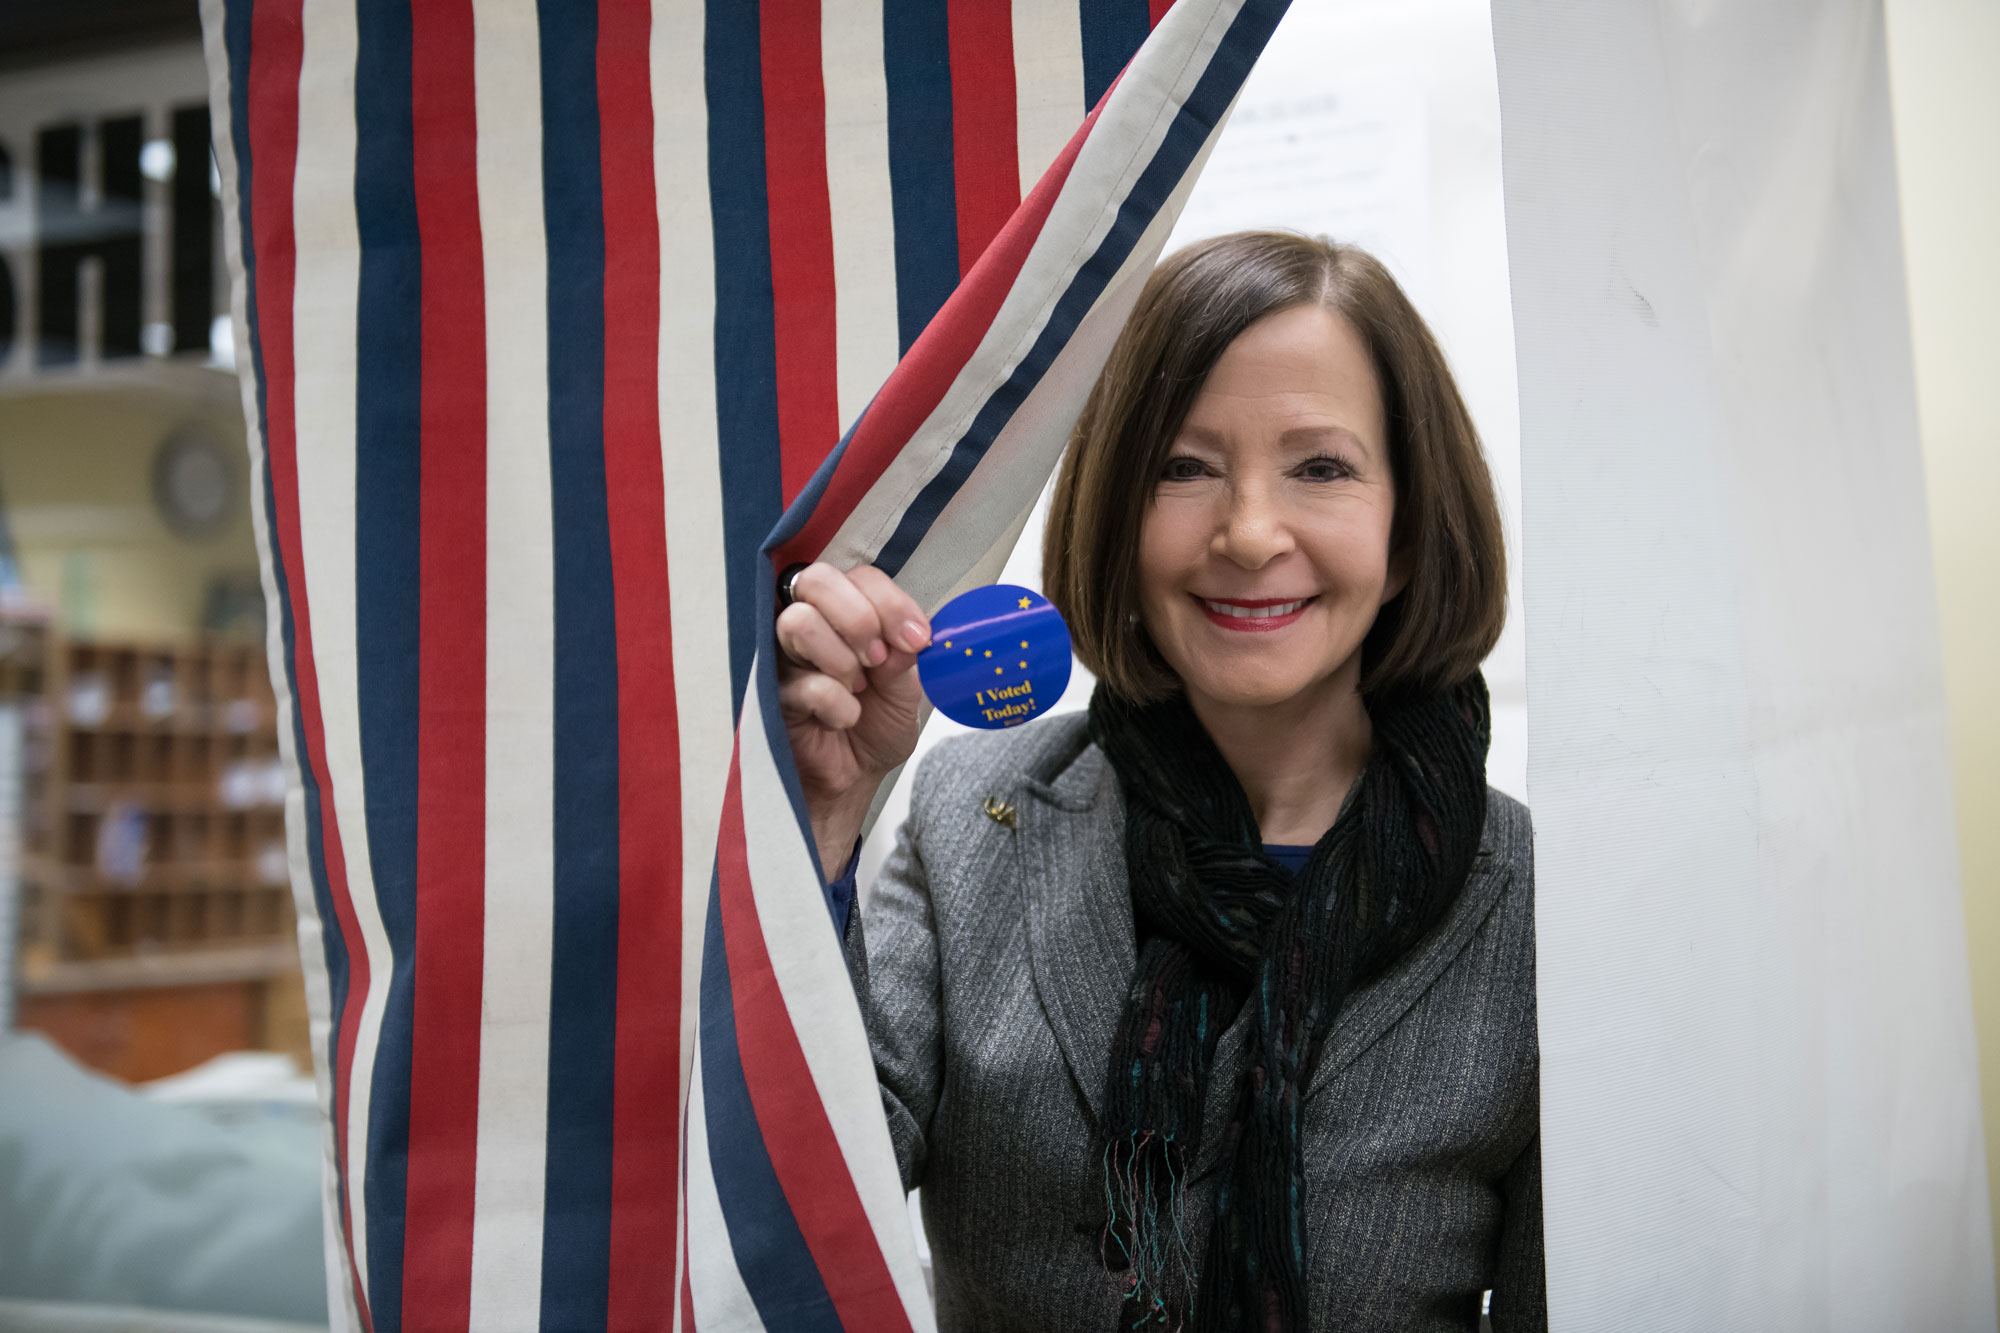 Chancellor Sandeen with I Voted sticker